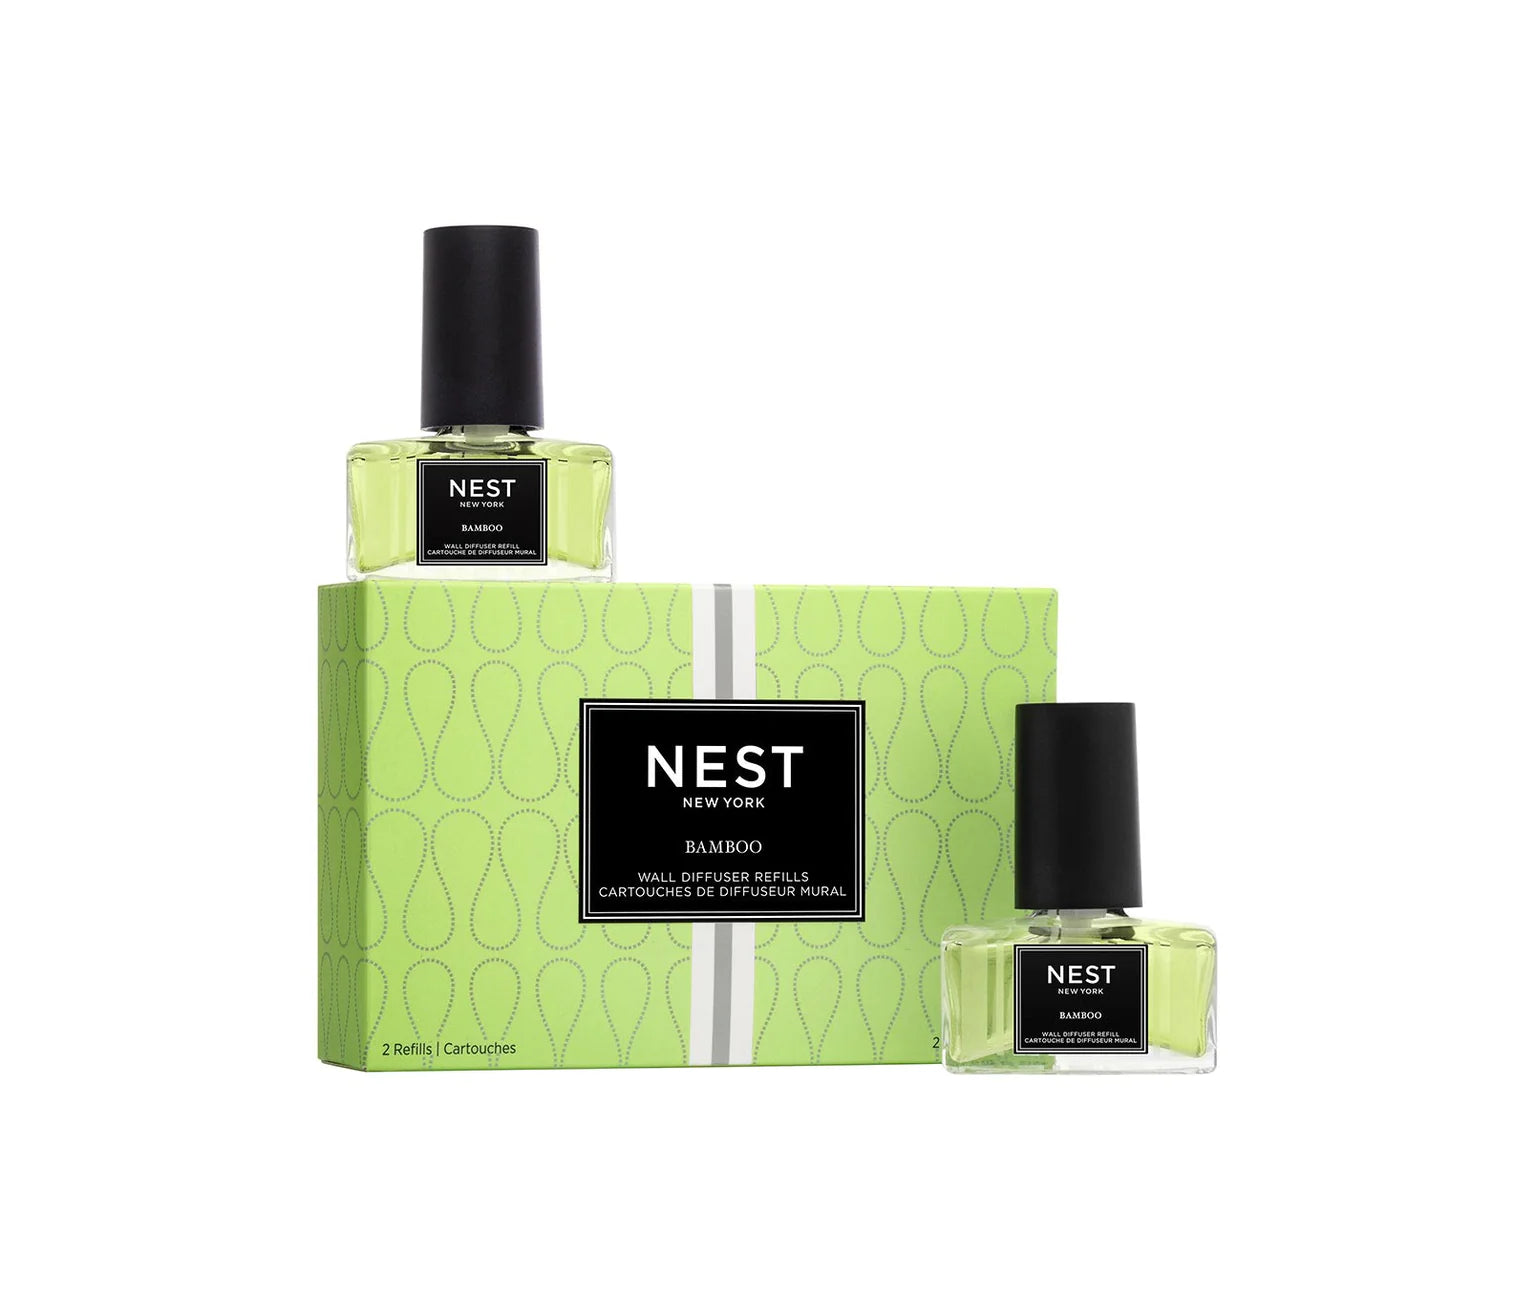 NEST Wall Diffuser Refill Duo